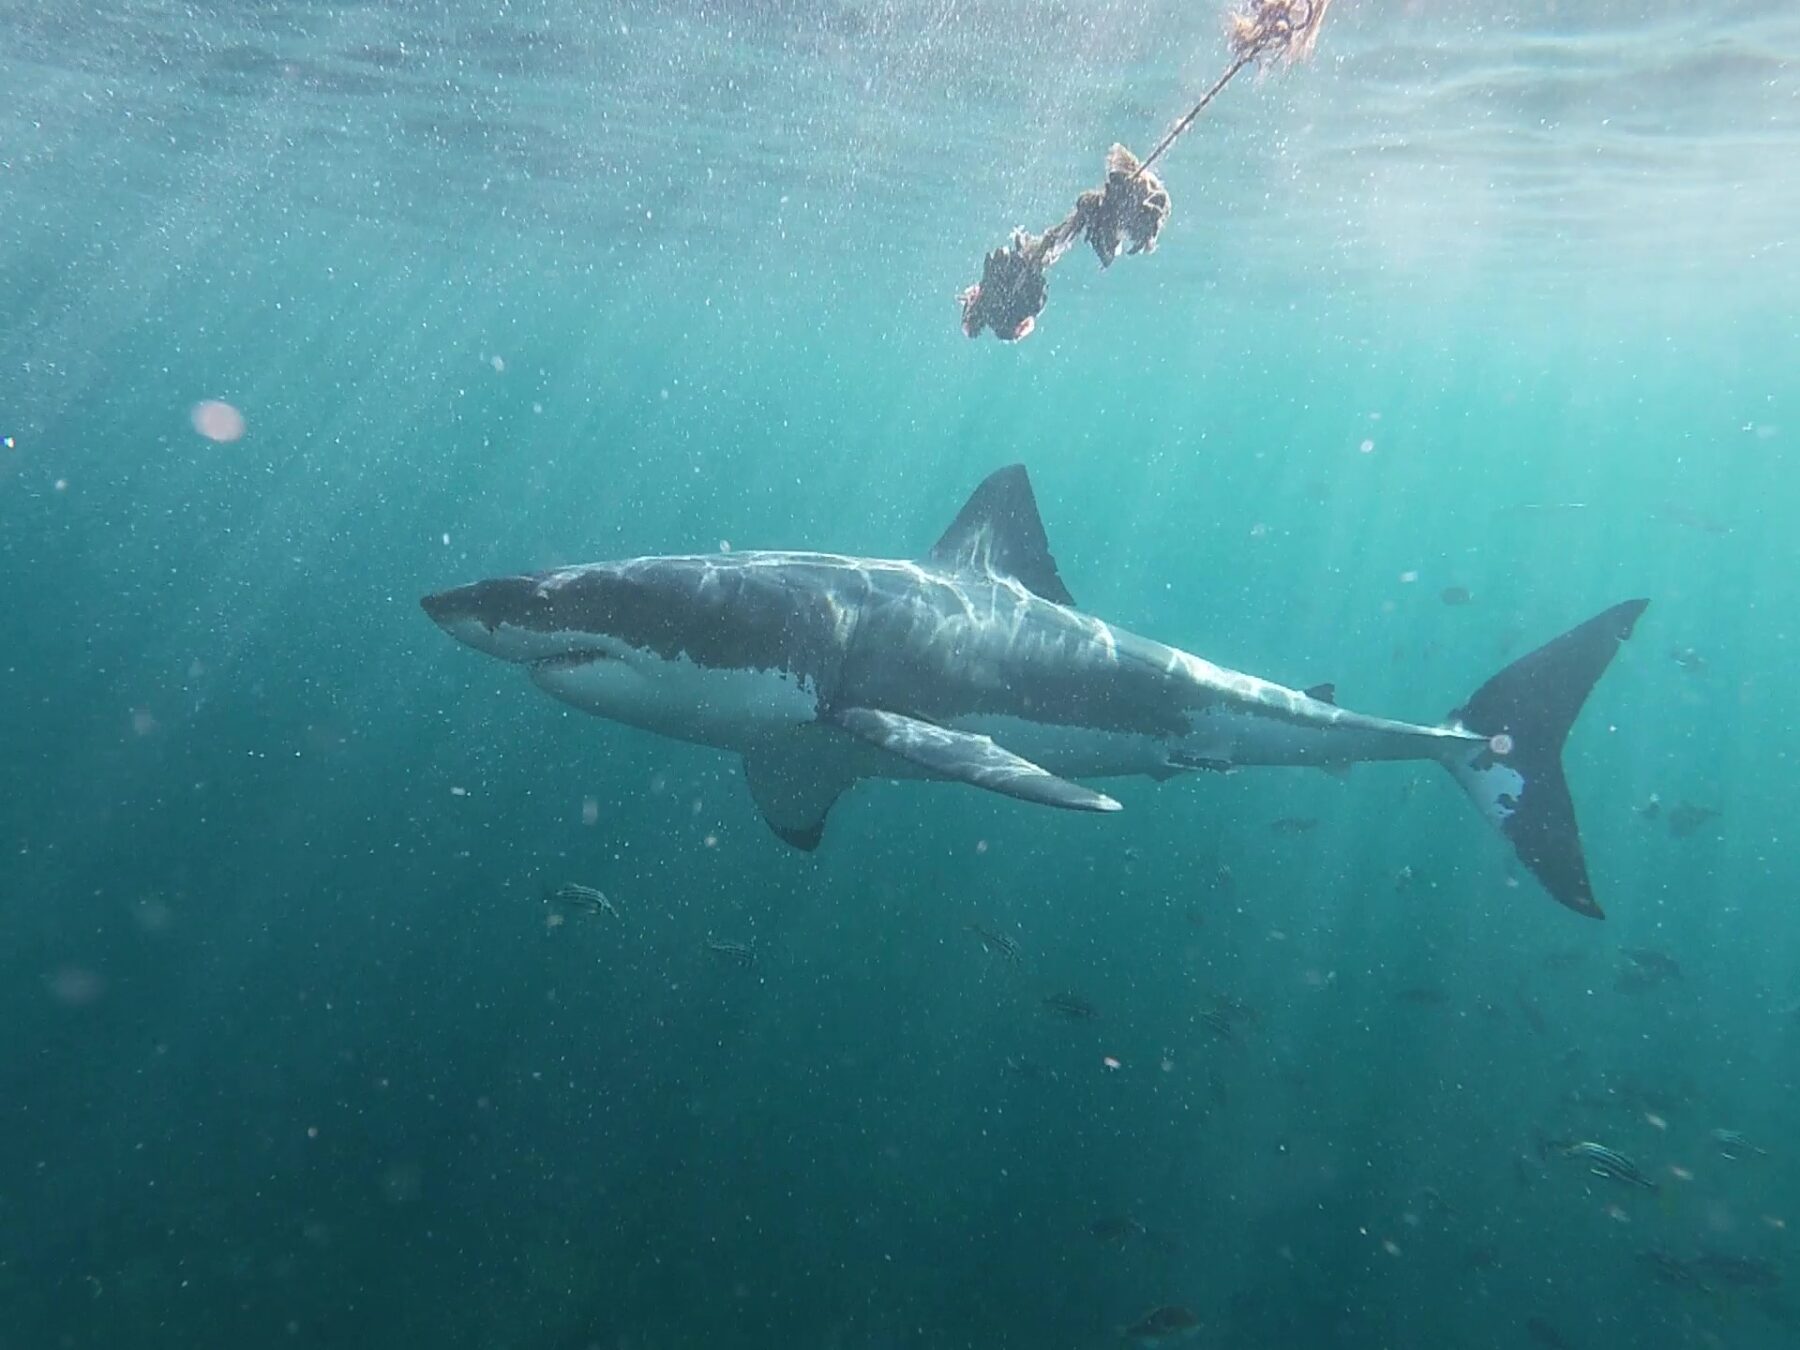 Great white shark cage diving in New Zealand